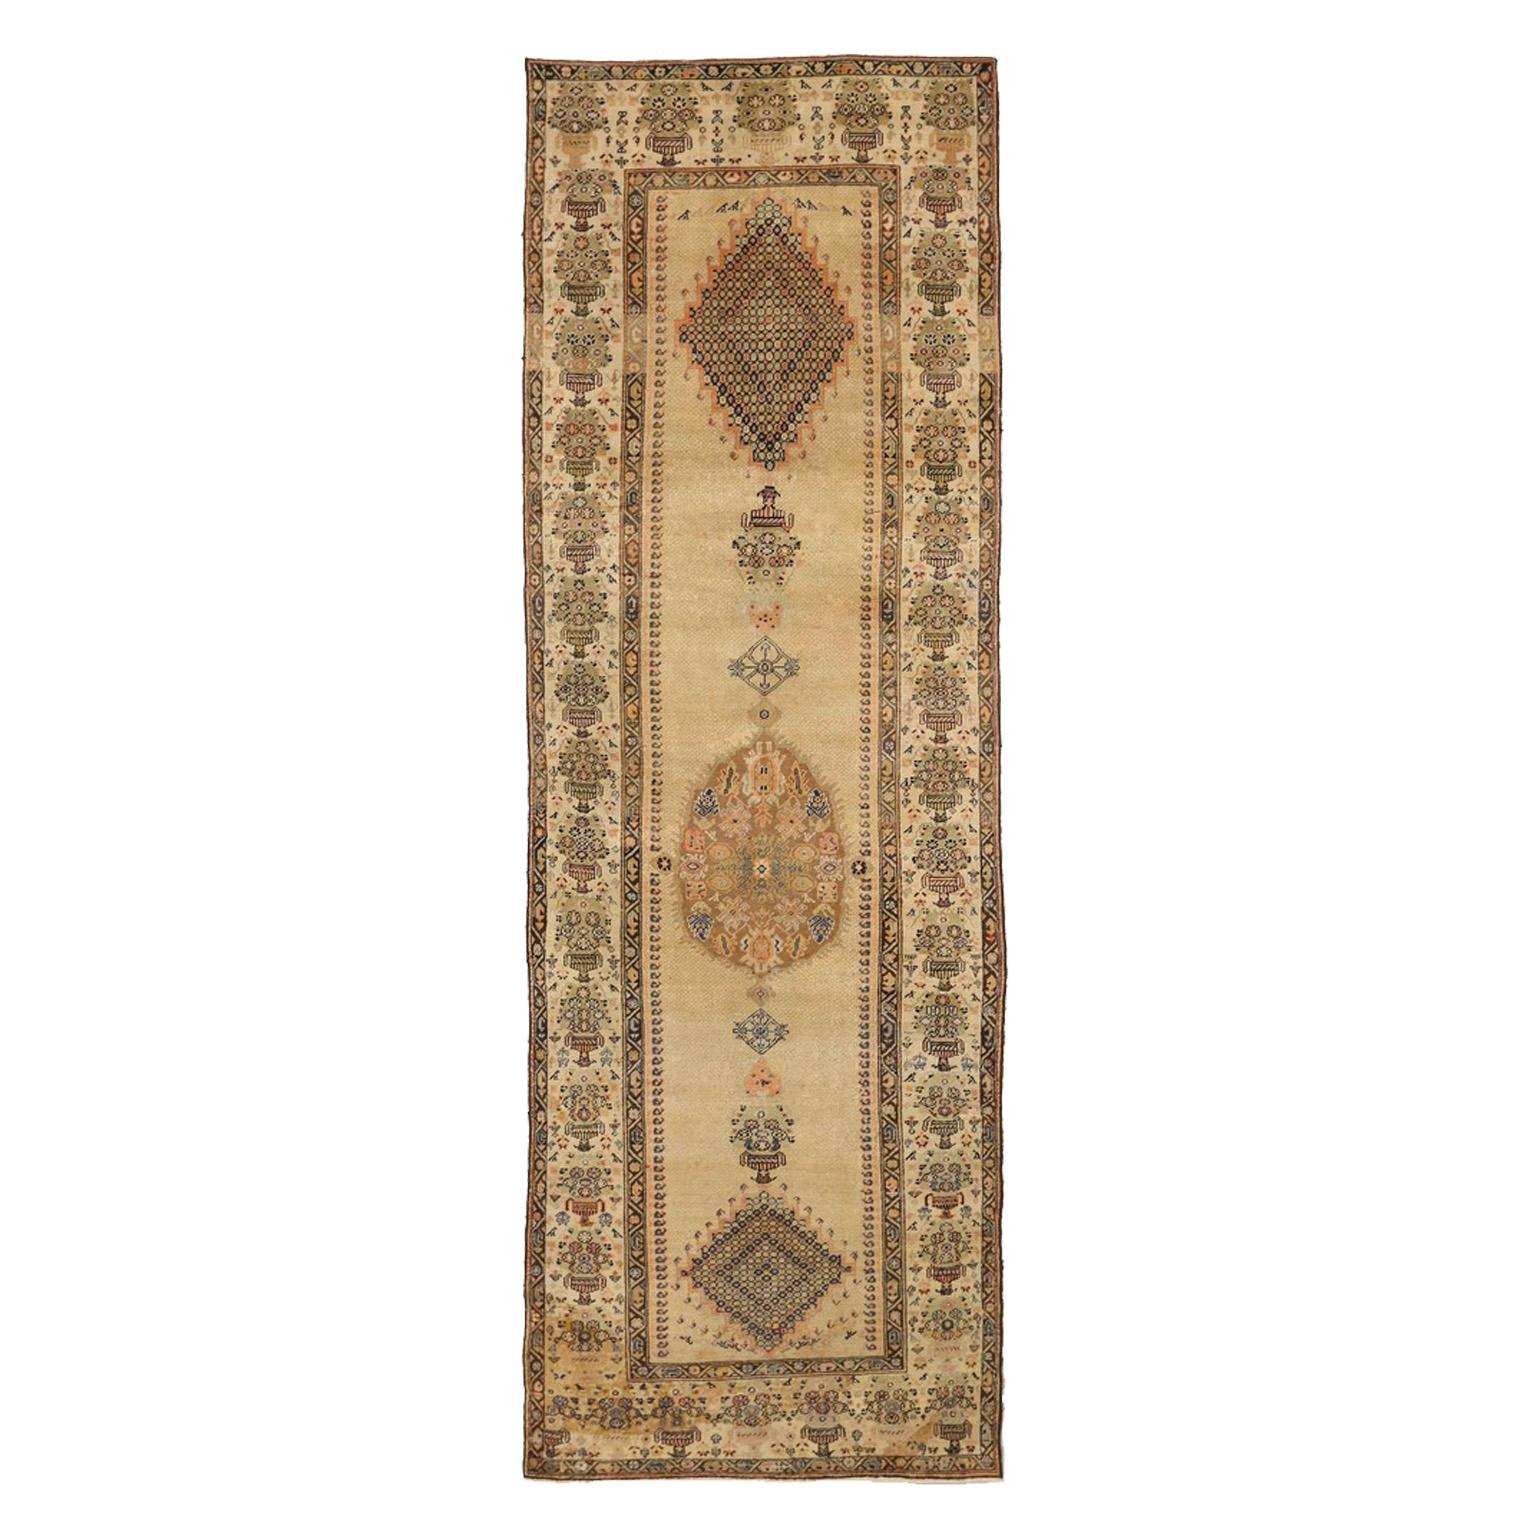 Handwoven from the finest camel hair, this antique Persian Serab rug shows an ‘open field’ center design bordered by highly intricate floral and geometric patterns. It also displays several unique bluish details that look like tiny jewels from a